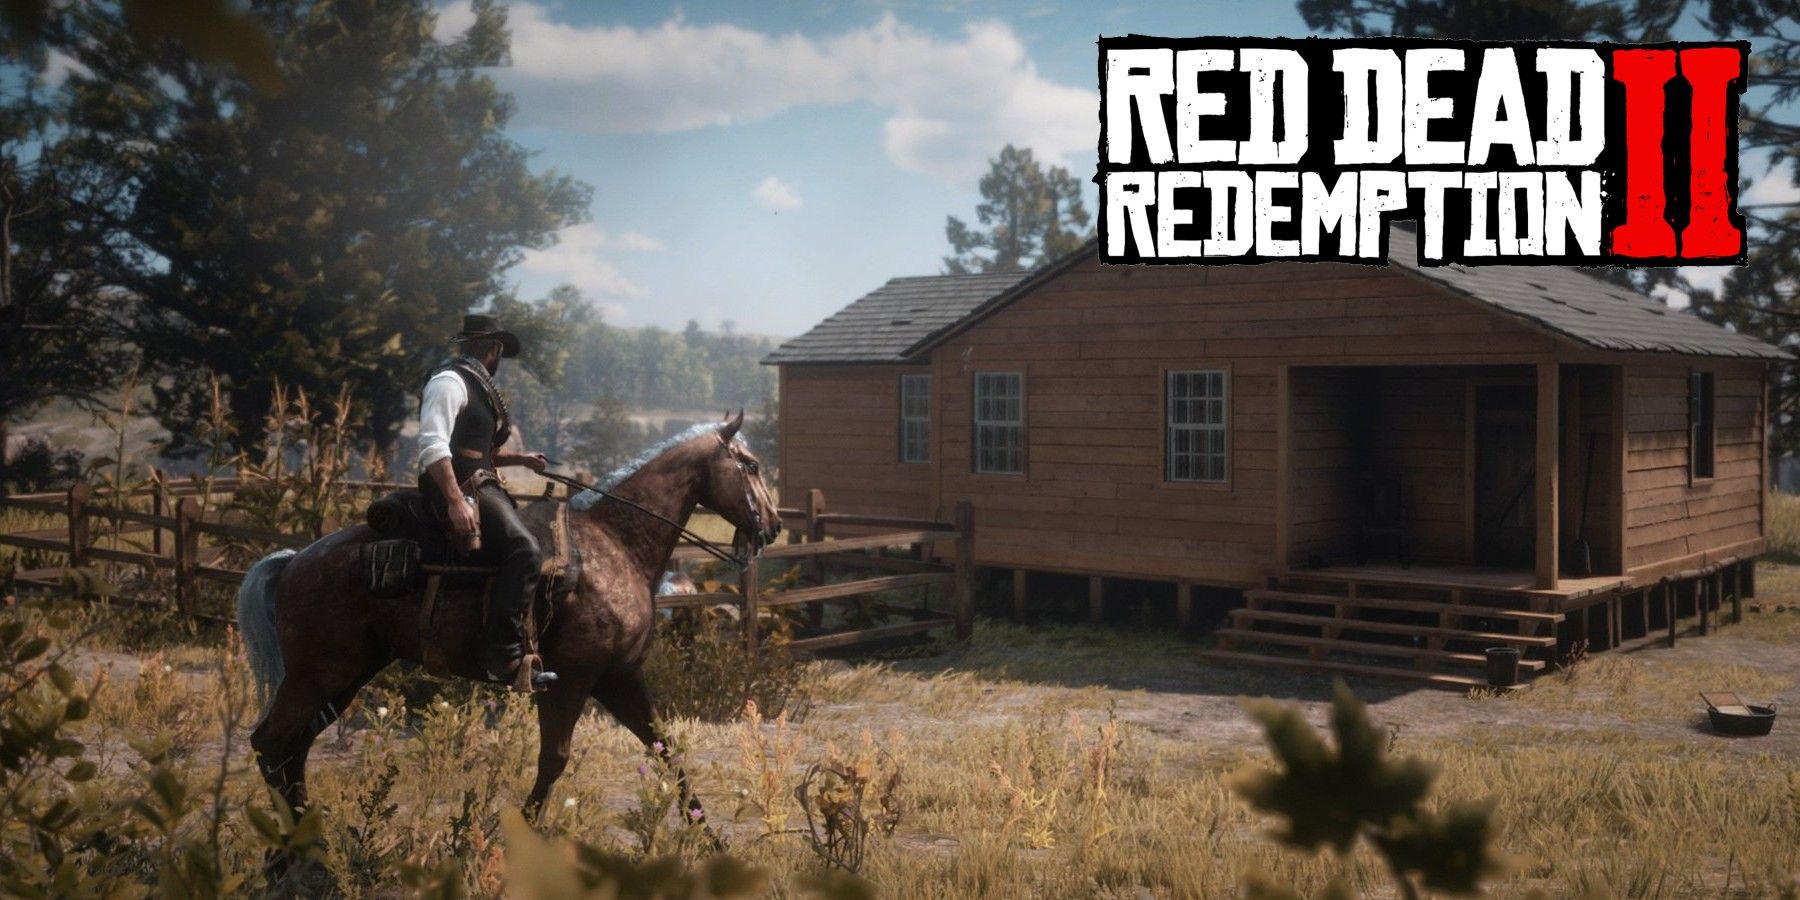 Unmissable Red Dead Redemption 2 Clip: Why You Can't Take Your Eyes off the  Screen!